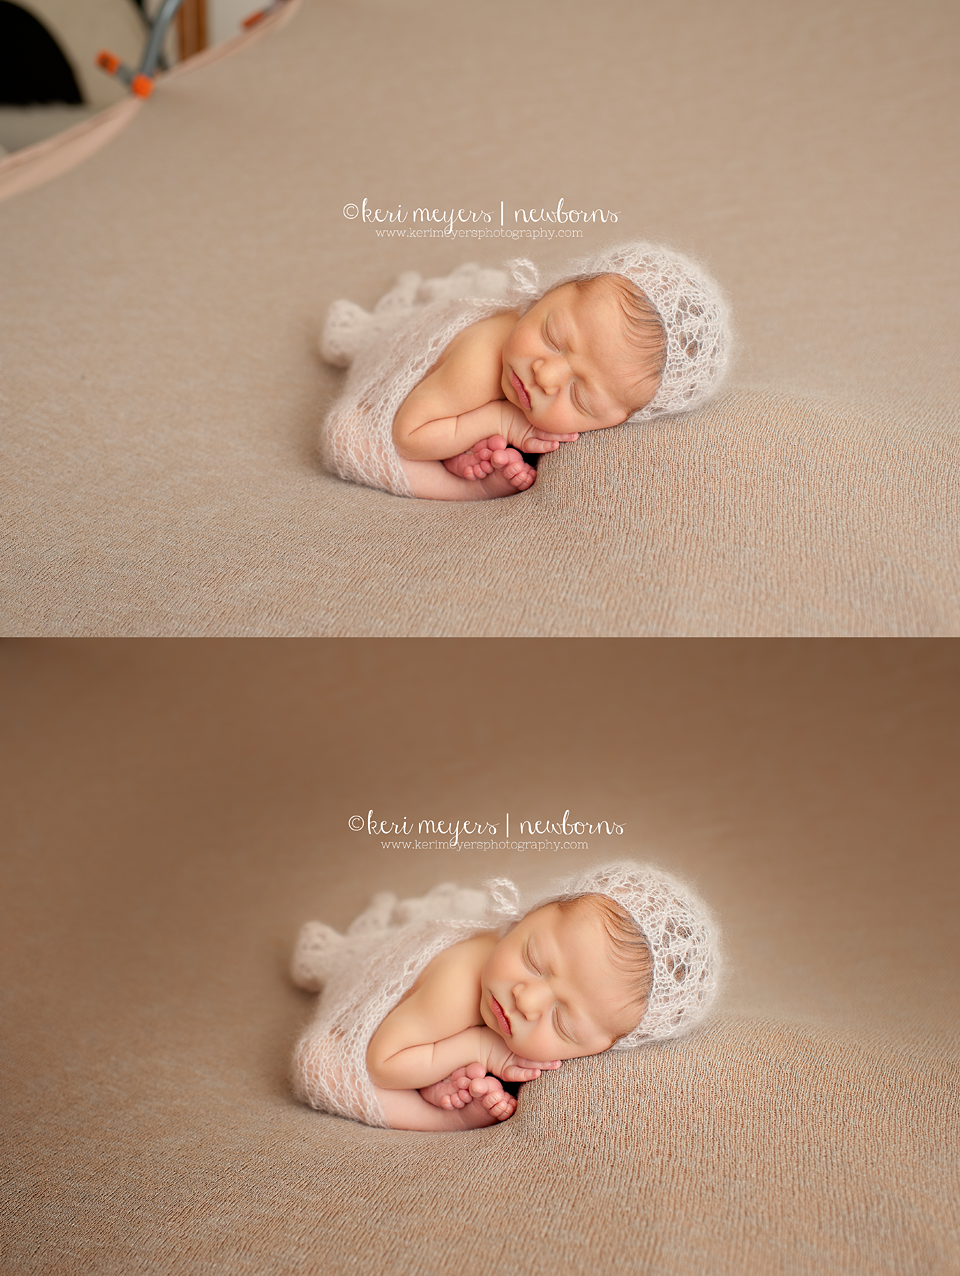 newborn photography community critique photo submitted by Keri Meyers - 11 community members set this photo as a favourite image.